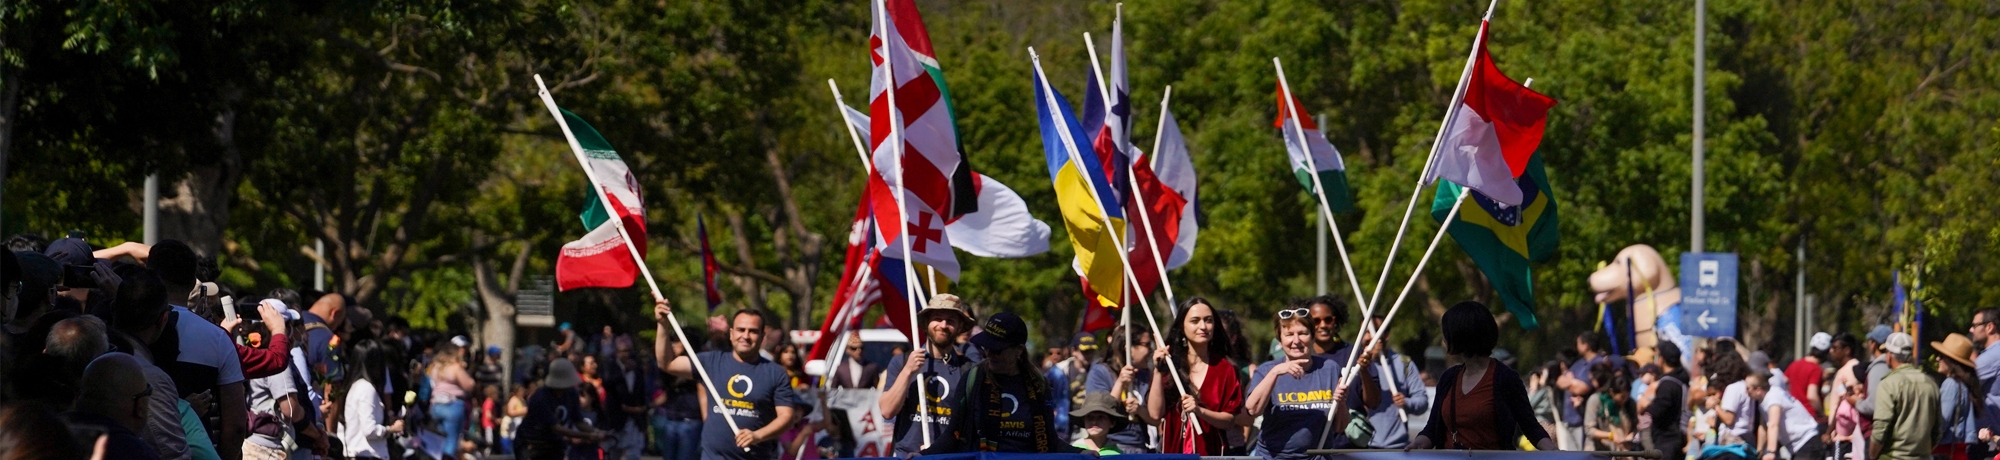 Group of Global Affairs staff and community members holding various countries' flags while marching in a parade.